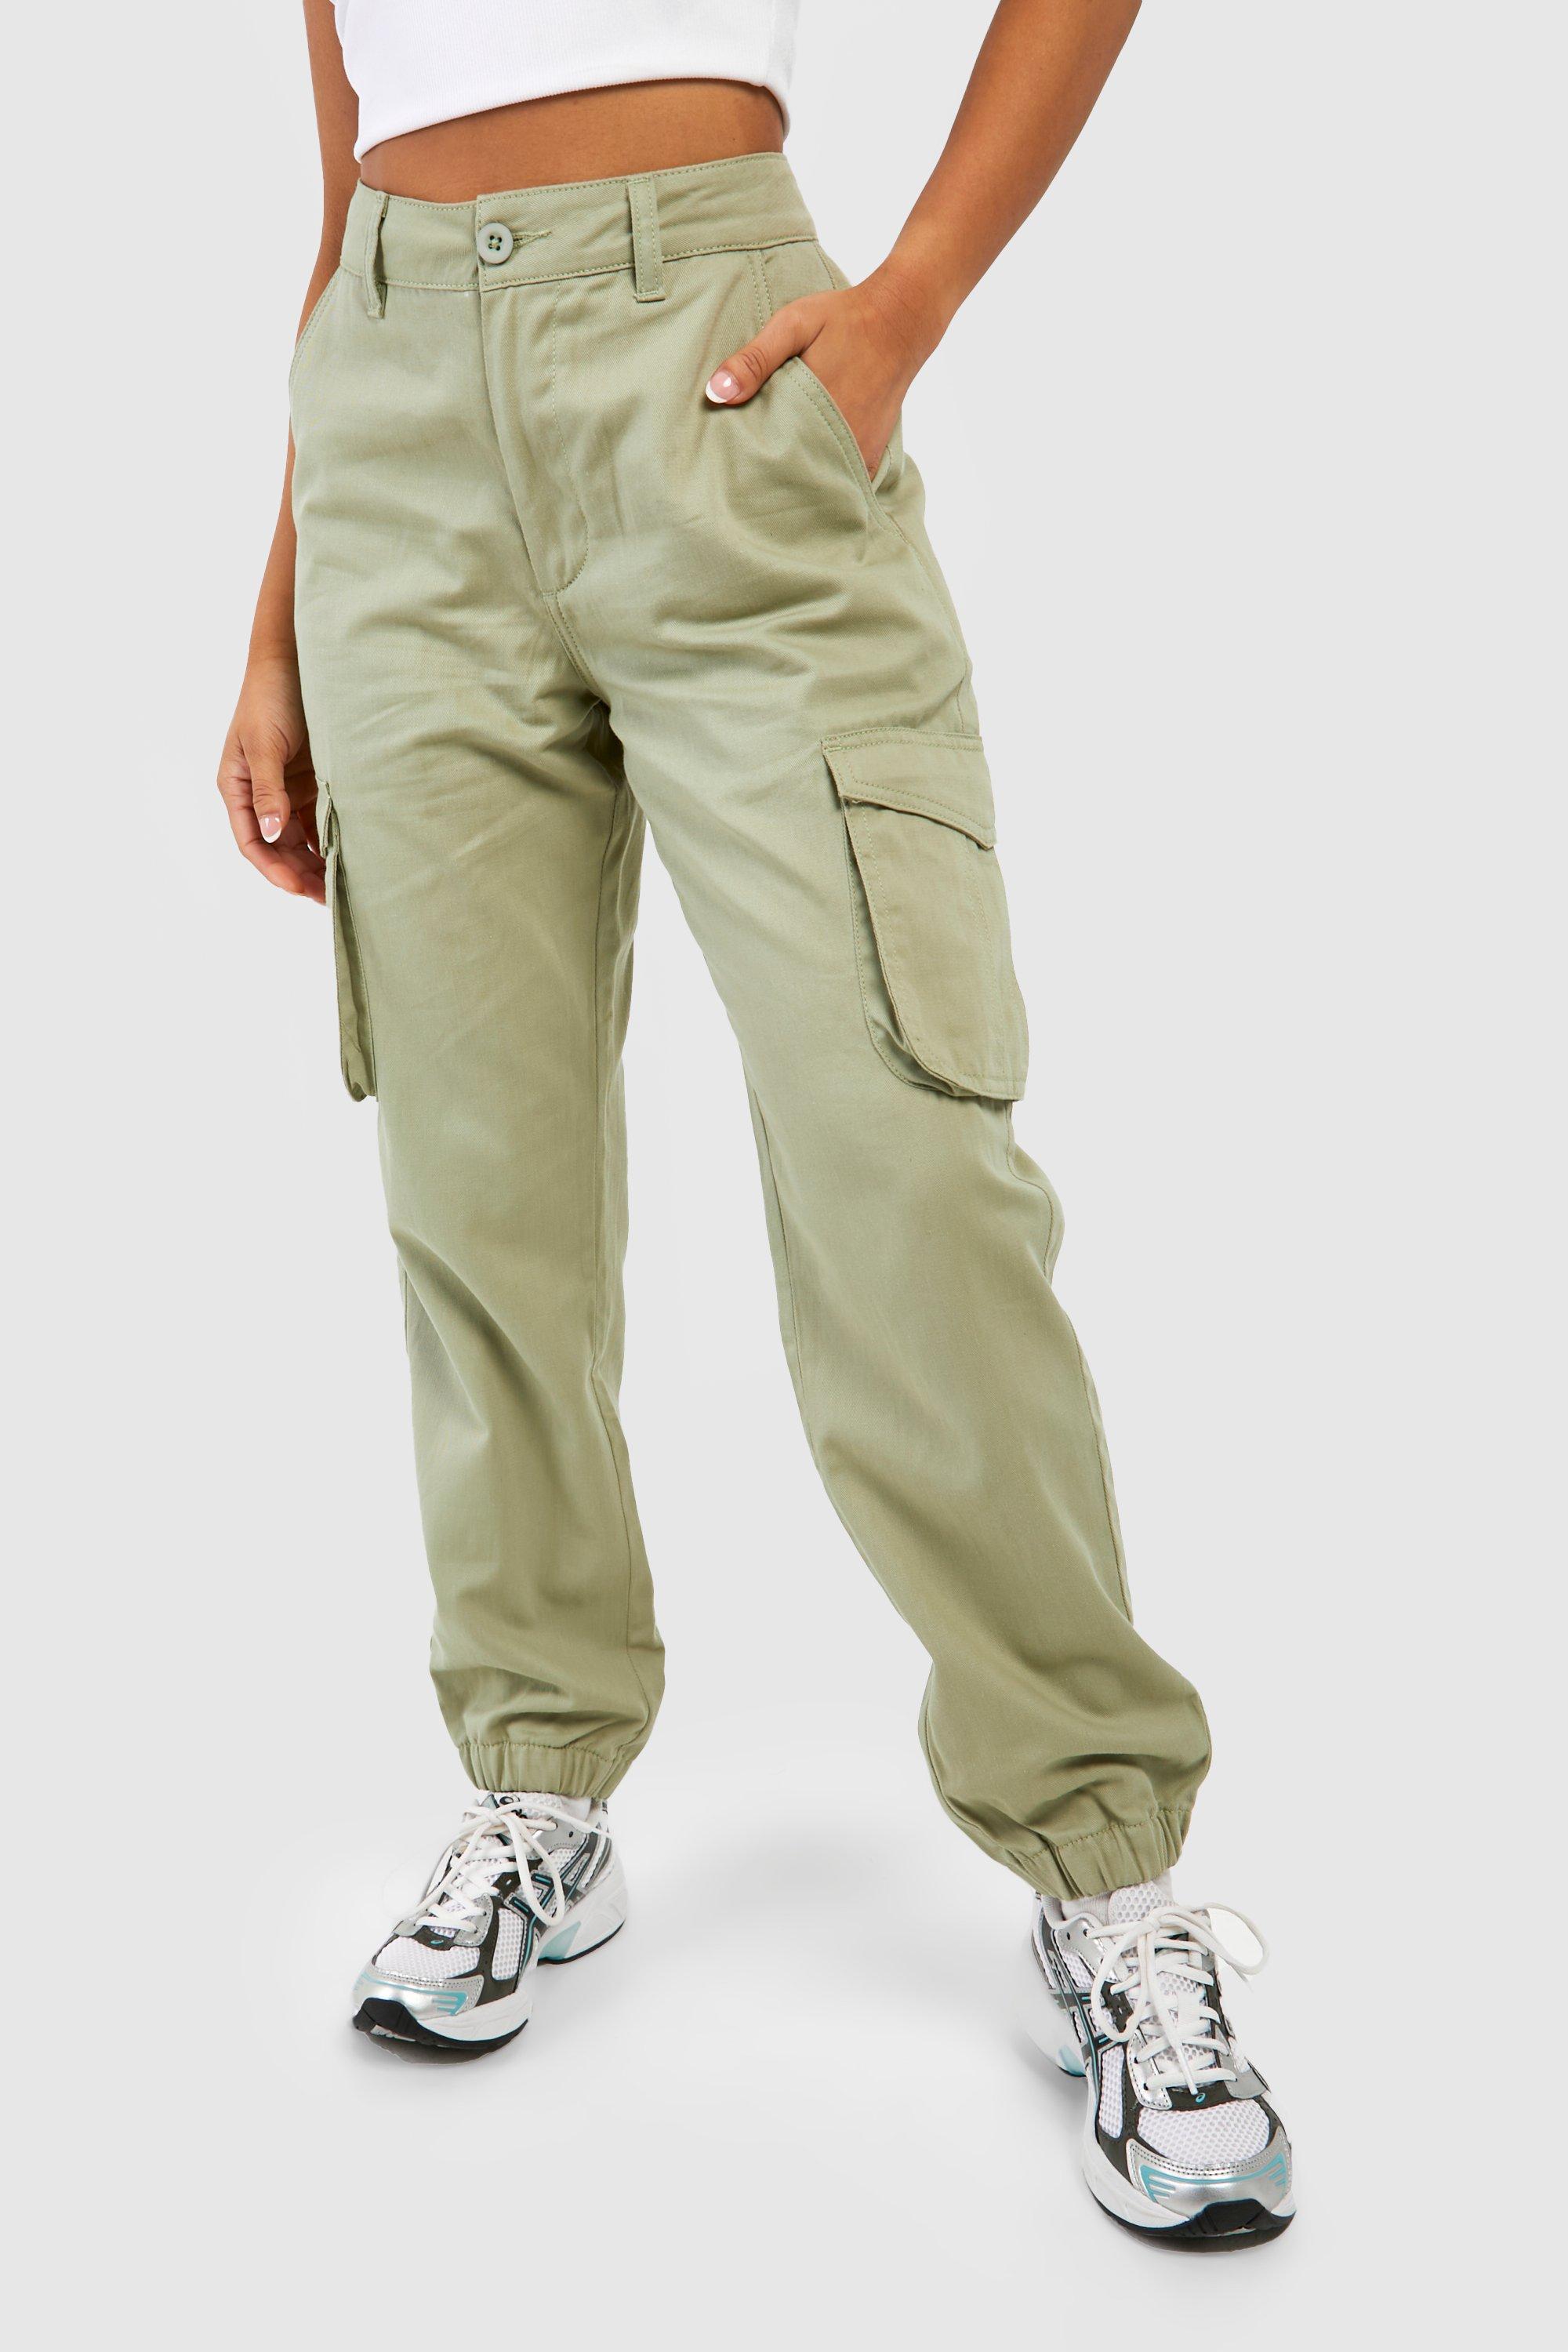 Women's Petite High Waisted Twill Cargo Joggers